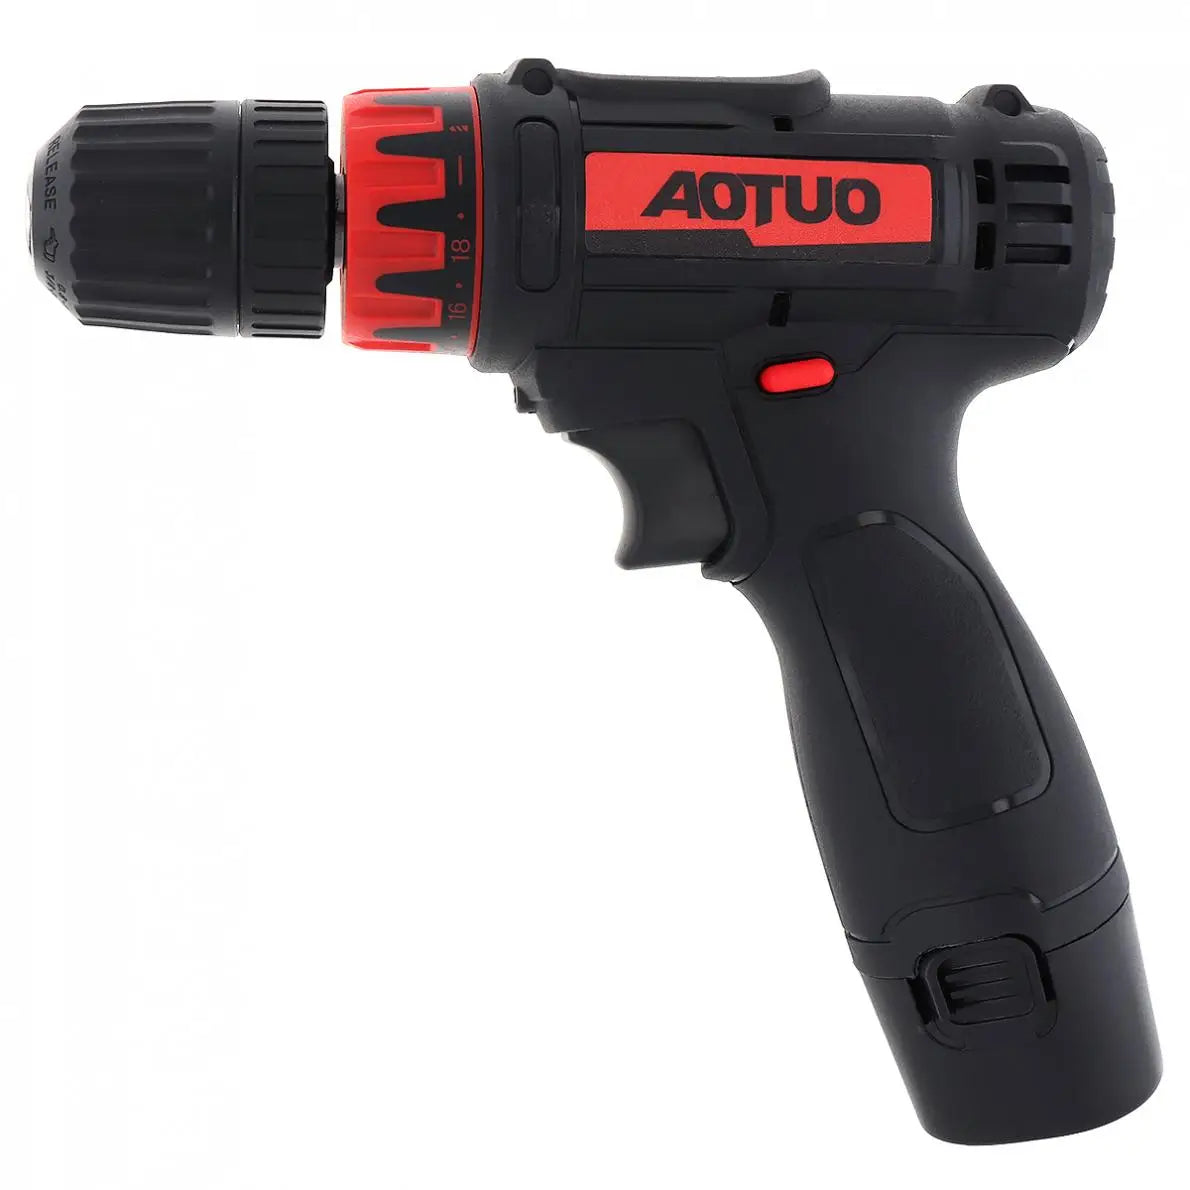 AC 100 - 240V Cordless 12V Household Lithium Electric Drill Rotation Adjustment Switch